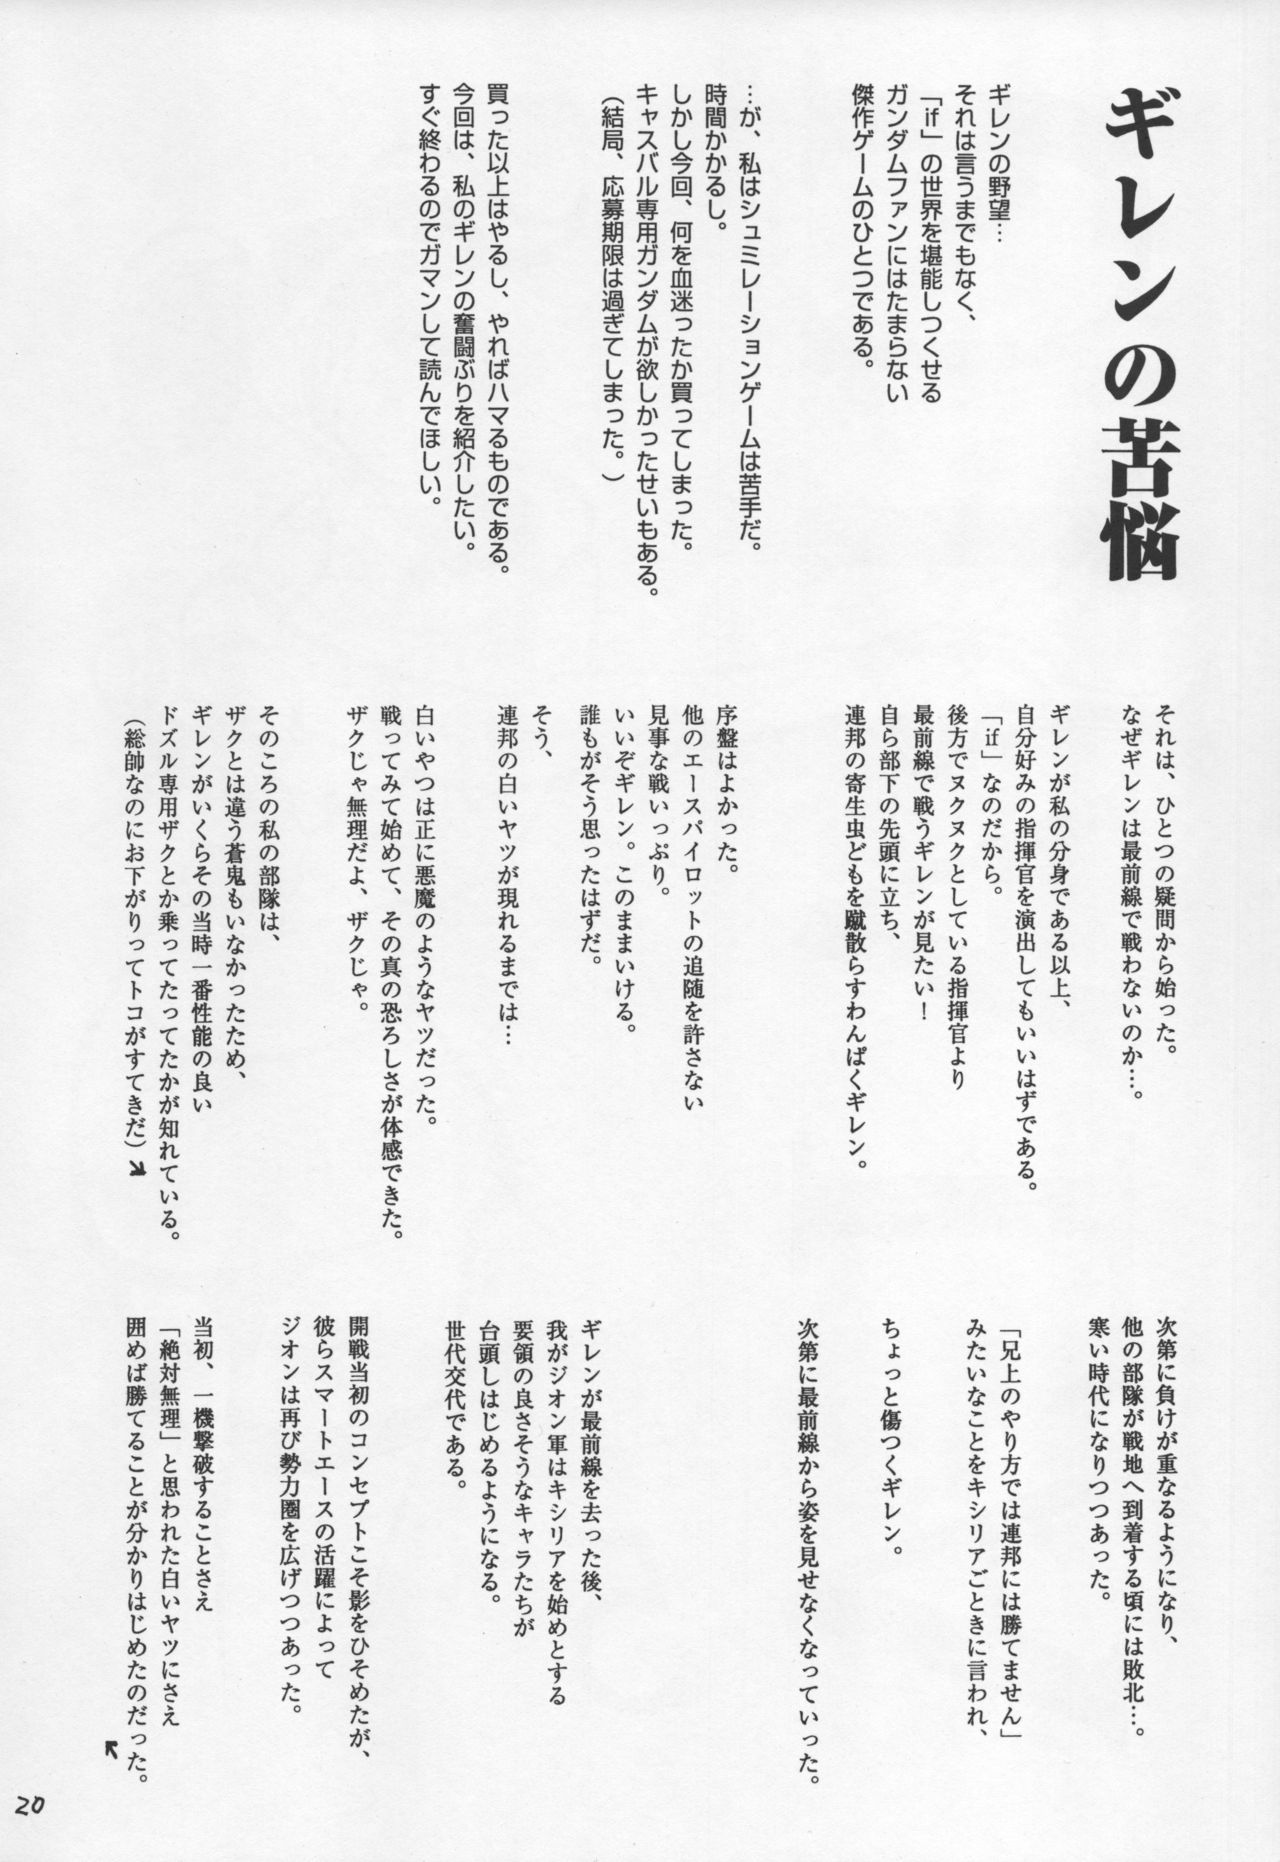 (C62) [PARADISED PRODUCTS (HJB)] PD Vol. 1 (Dead or Alive) page 20 full